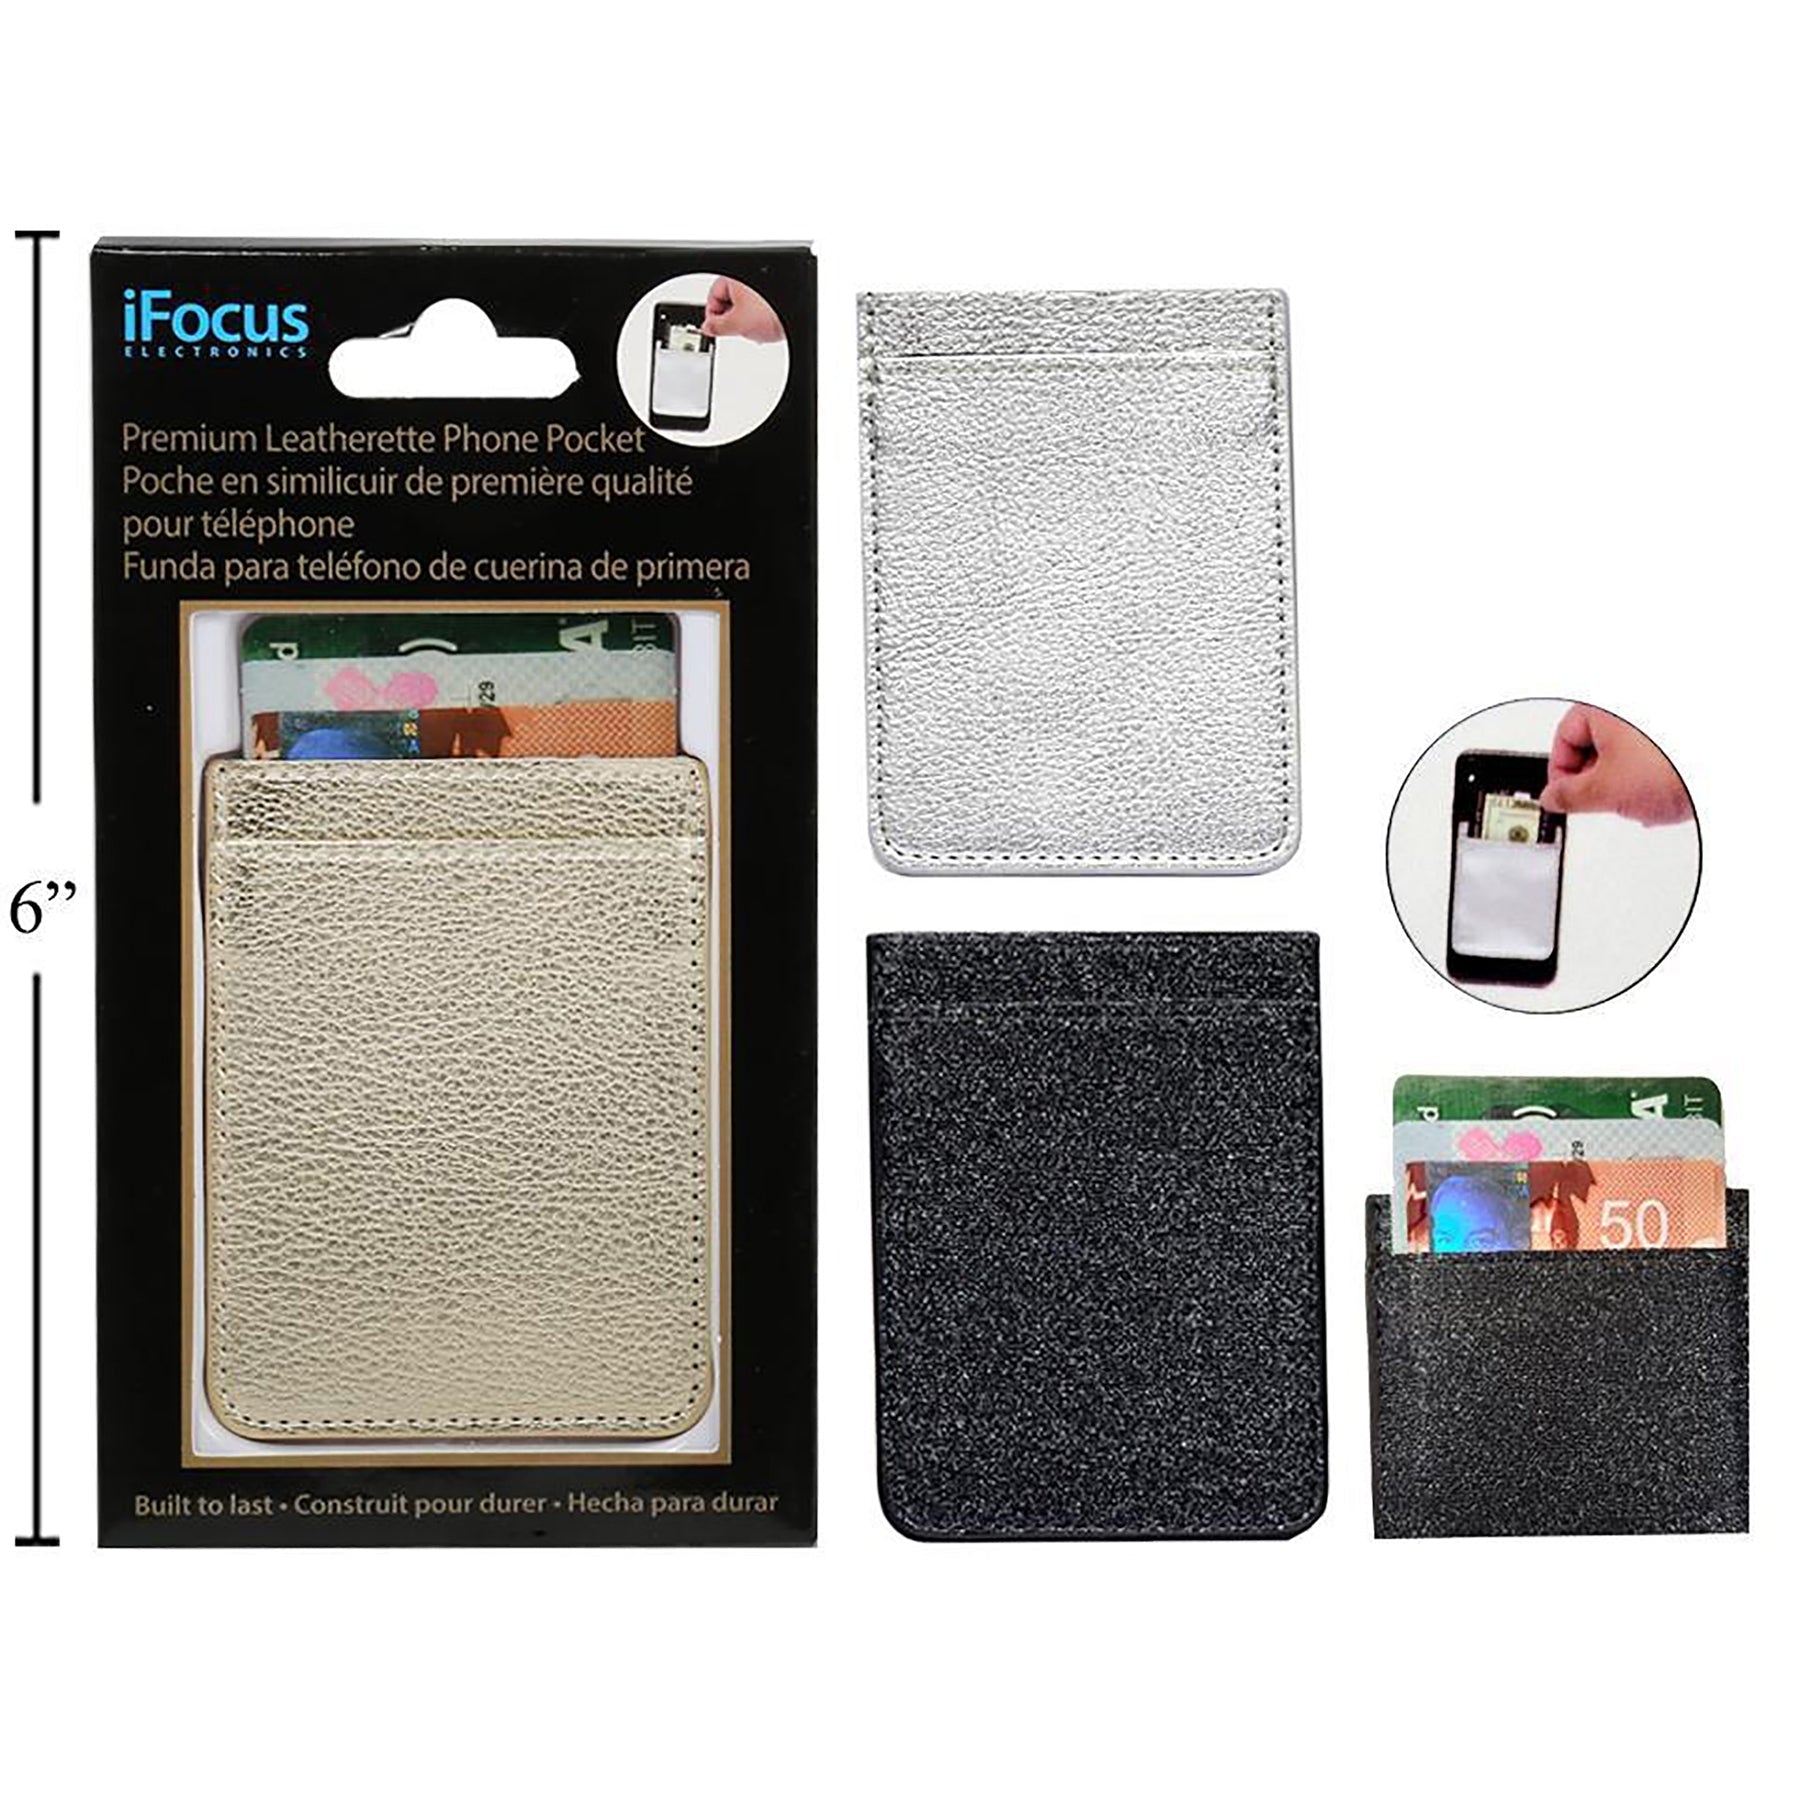 iFocus Premium Leatherette Mobile Phone Pouch 3.25x2.5in